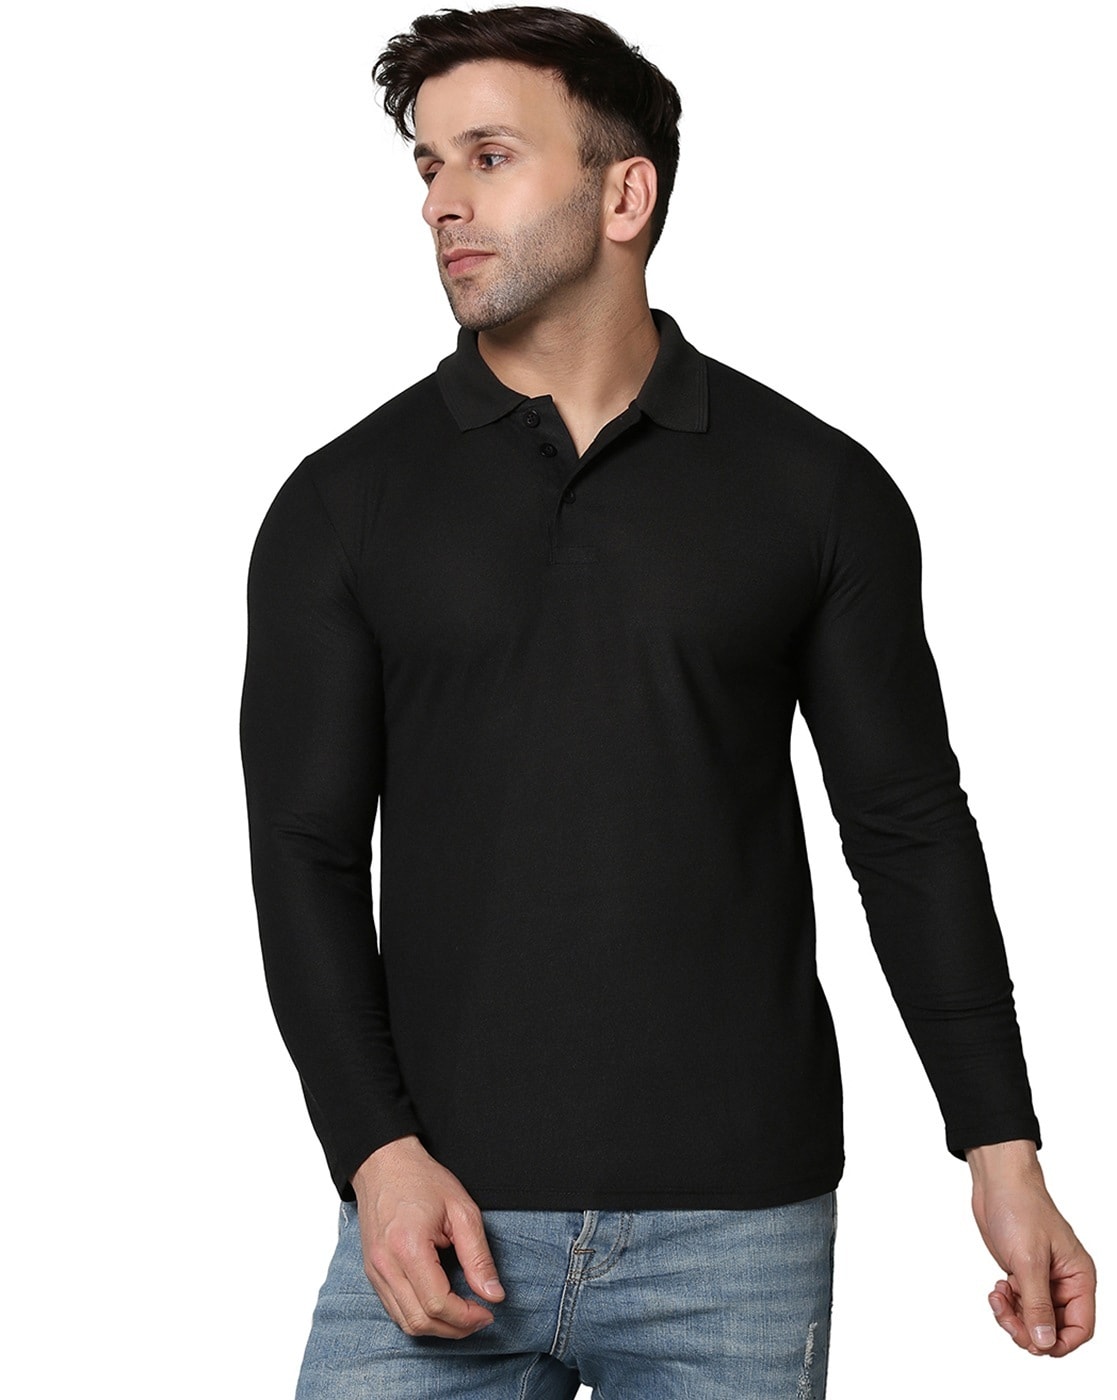 Cotton Black & White Mens 3/4th Sleeve Striped Shirt, Size: S,M,L,Xl at Rs  370 in Delhi